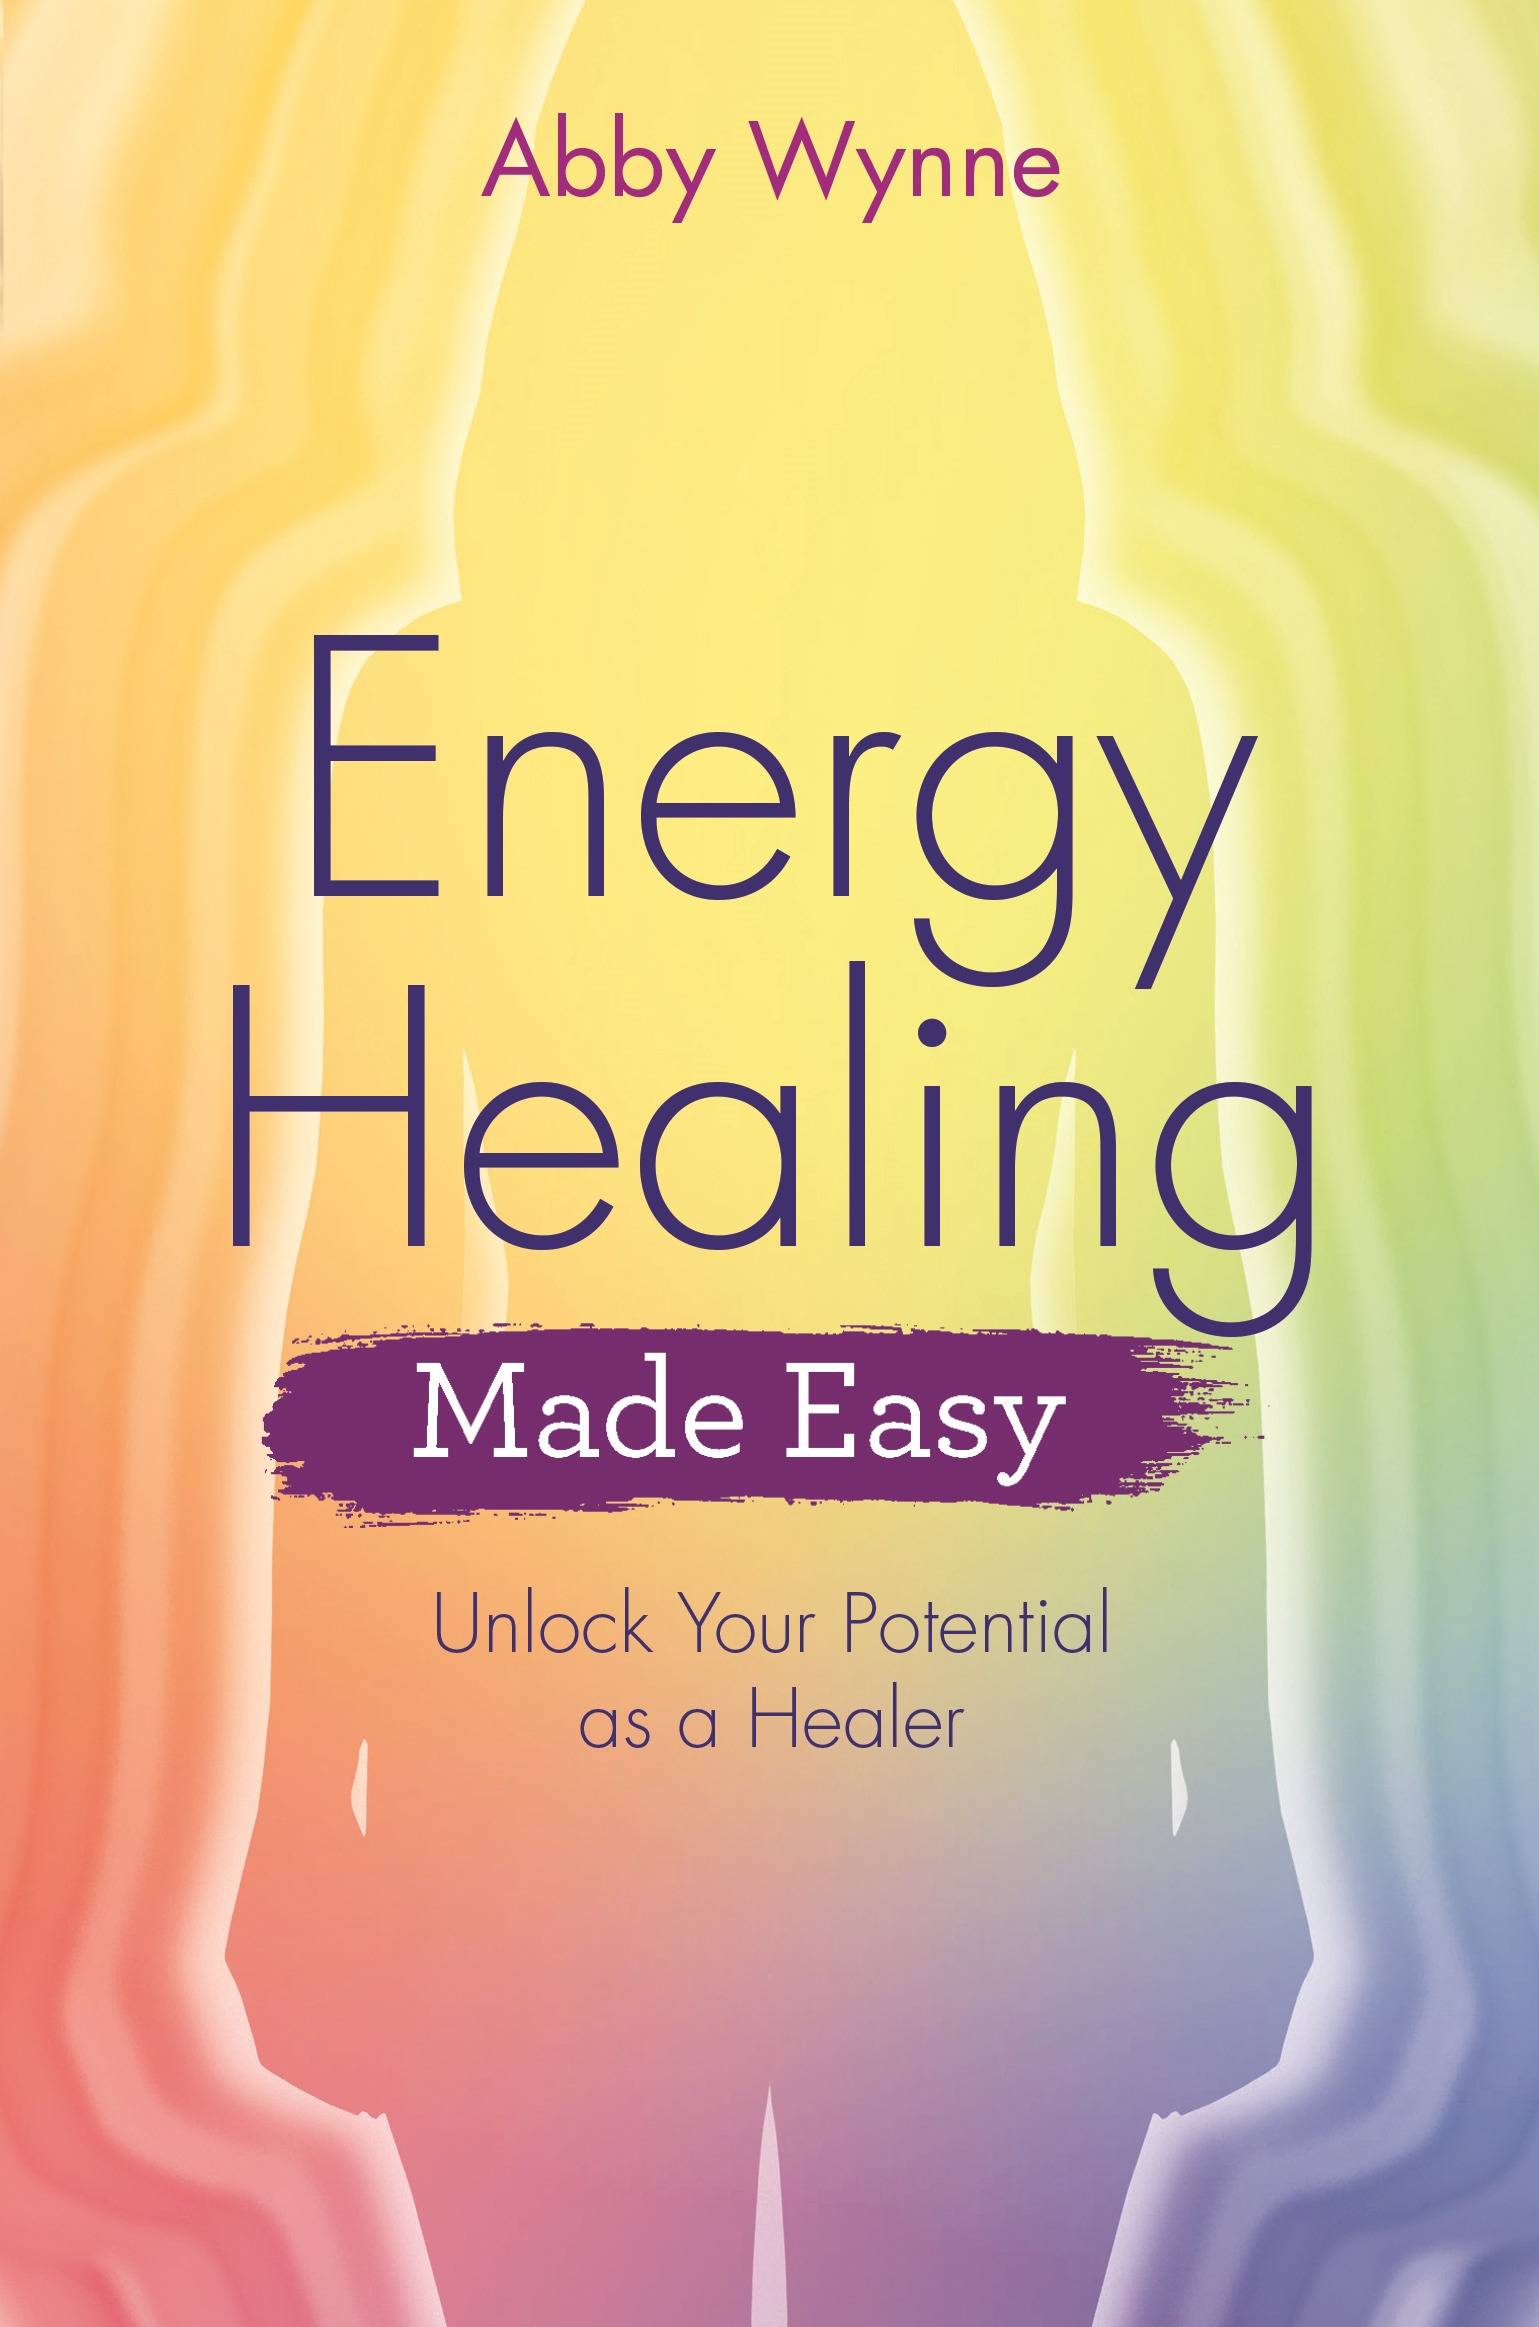 Energy healing made easy - unlock your potential as a healer